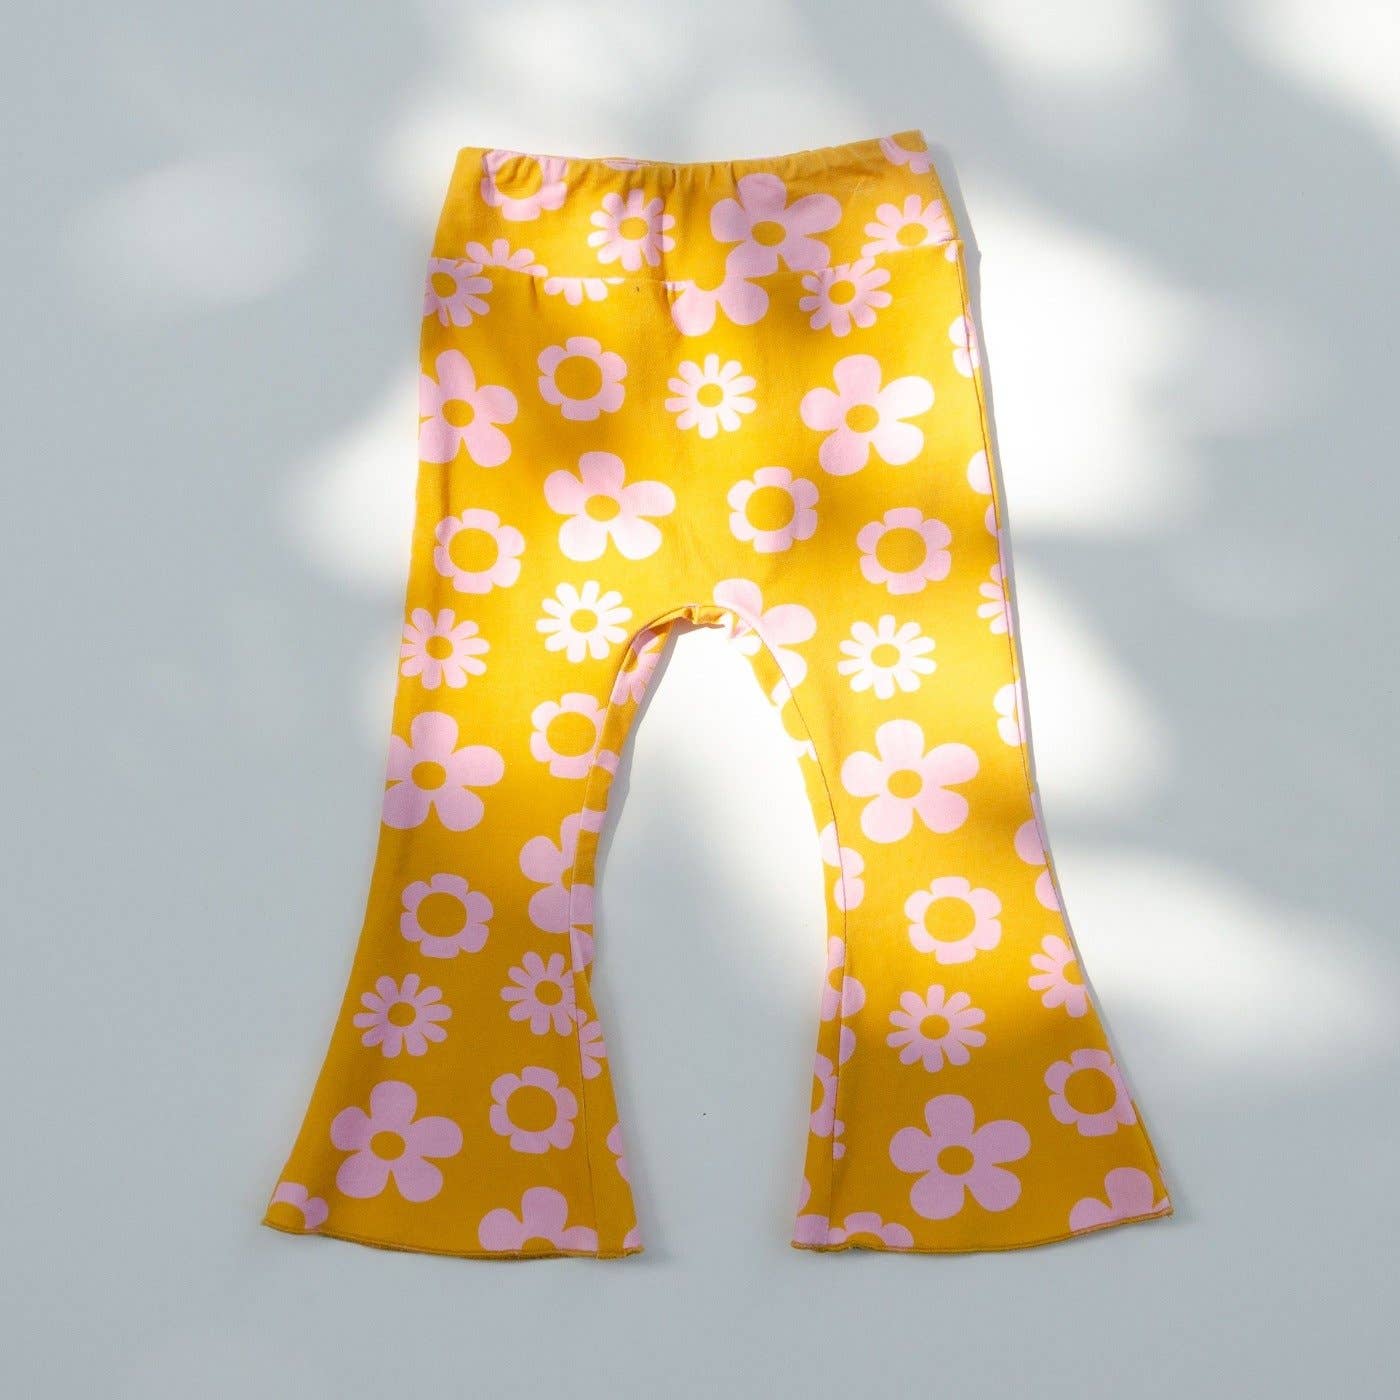 Printed Jersey Knit Bell Bottoms Two Groovy Birthday Outfit